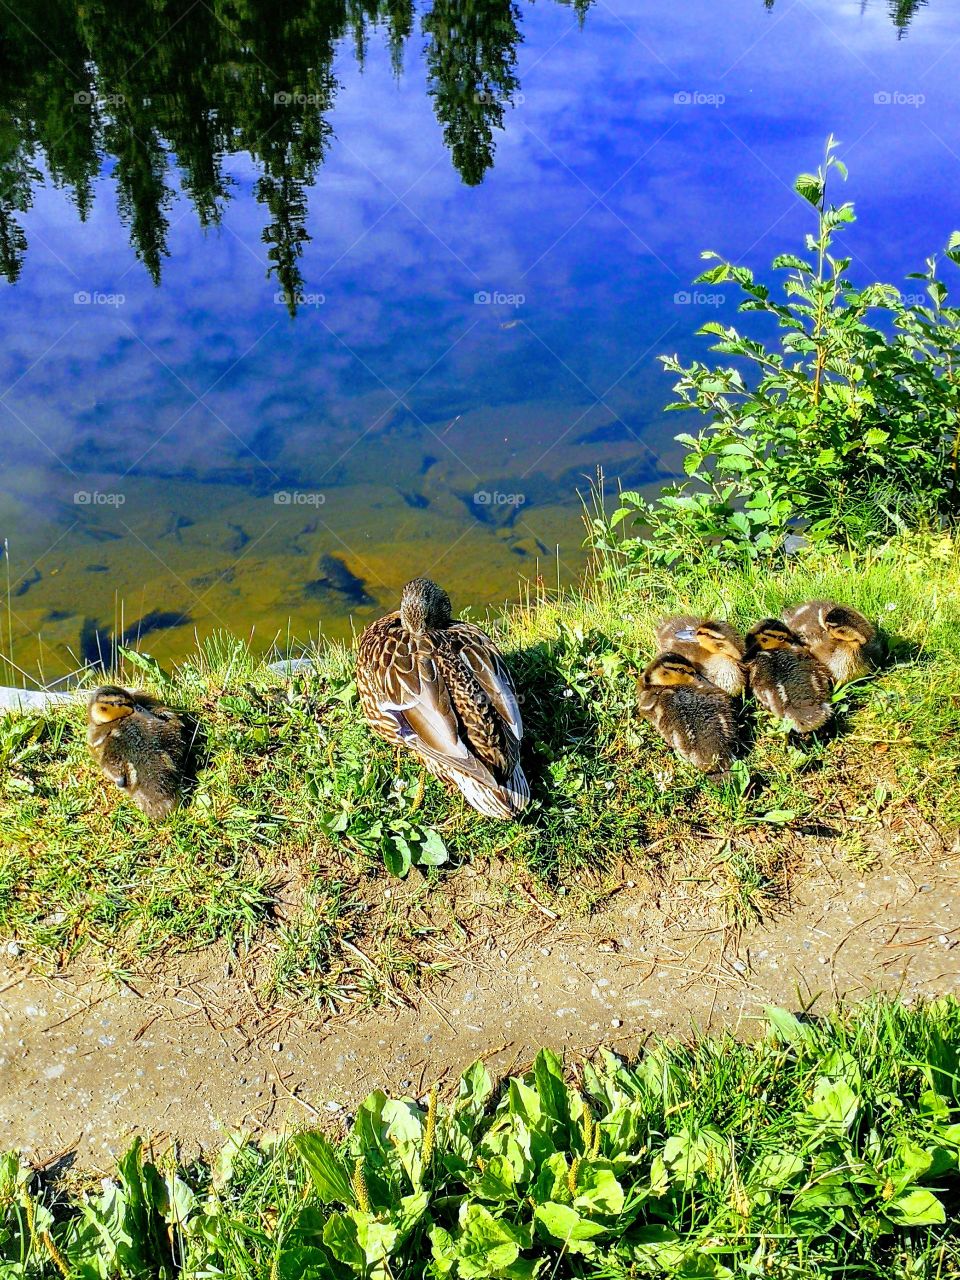 mom cane and her ducklings rest lelong lake